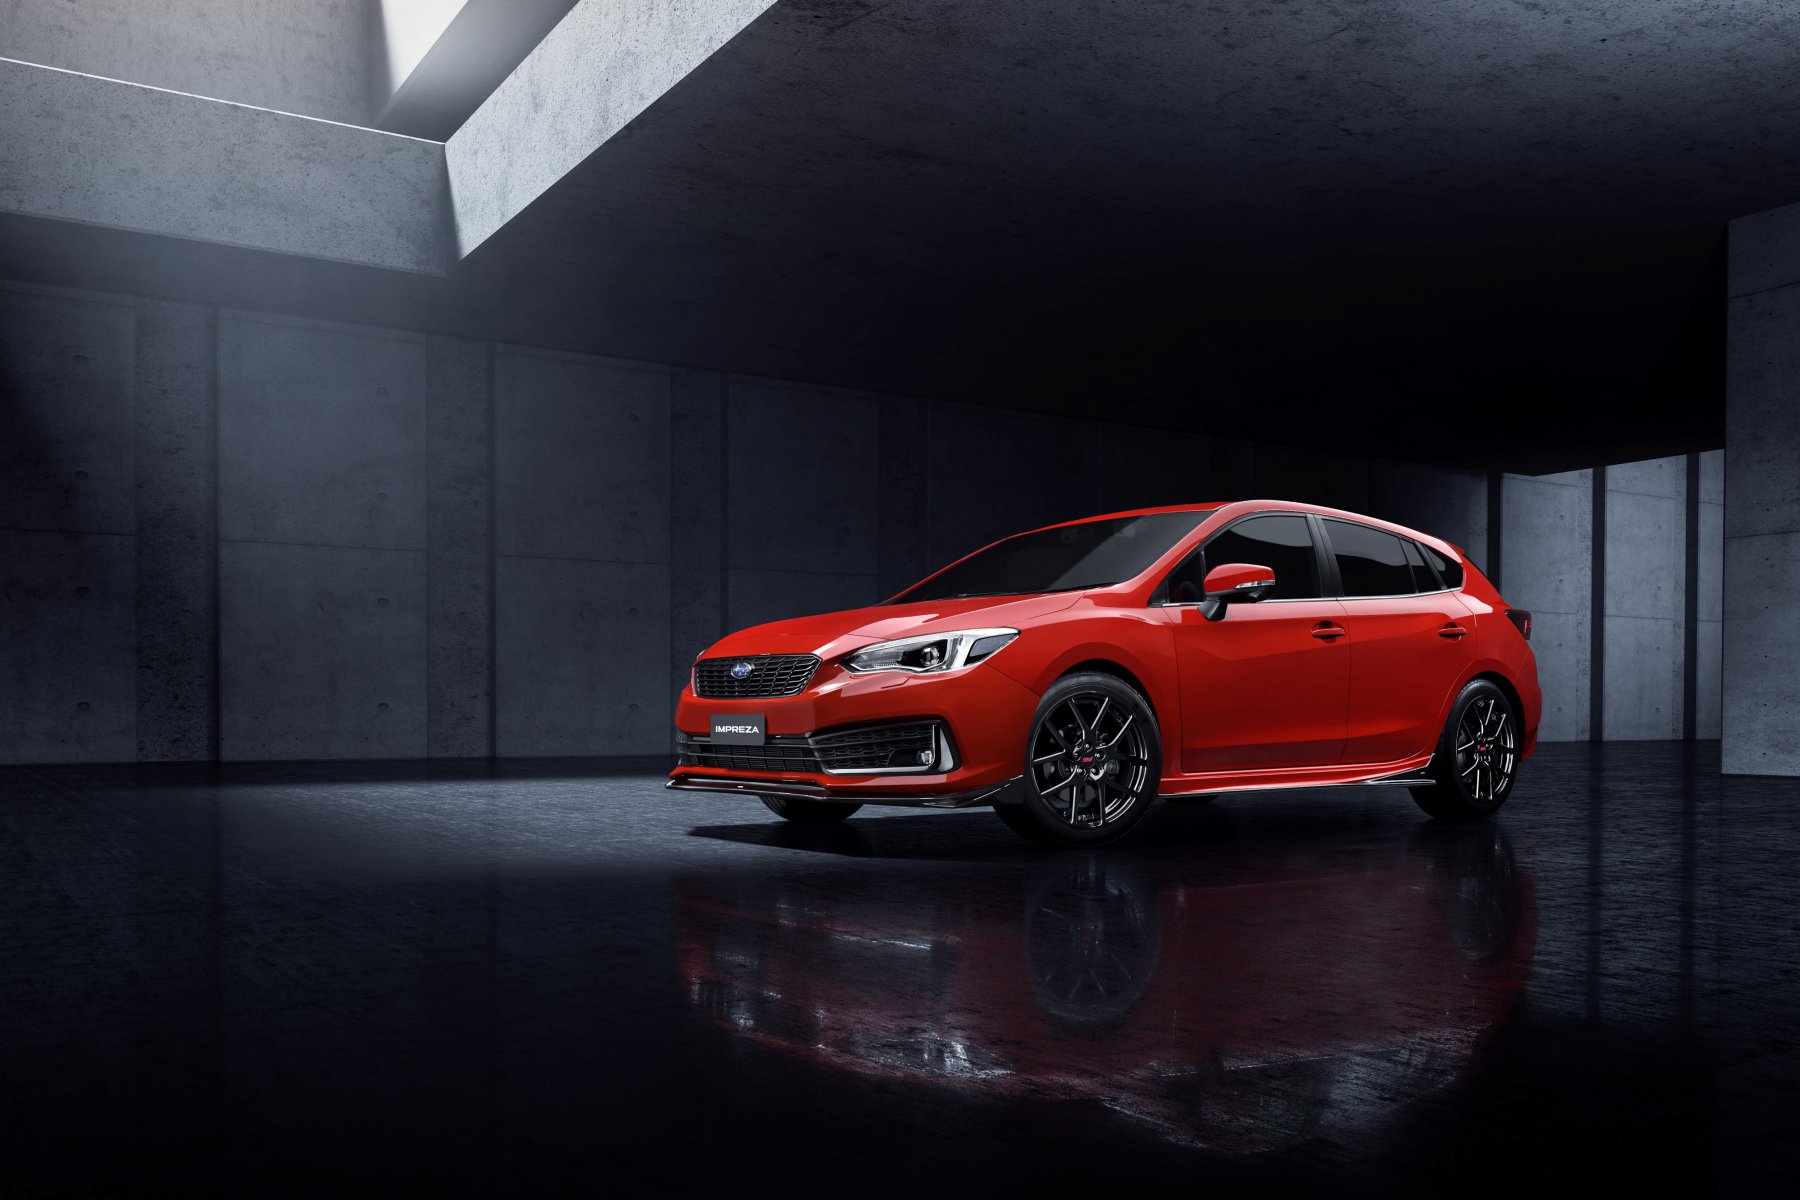 Special edition Impreza, equipped with exclusive STI and Genuine Subaru Accessories, to celebrate the 30th anniversary of the legendary model.